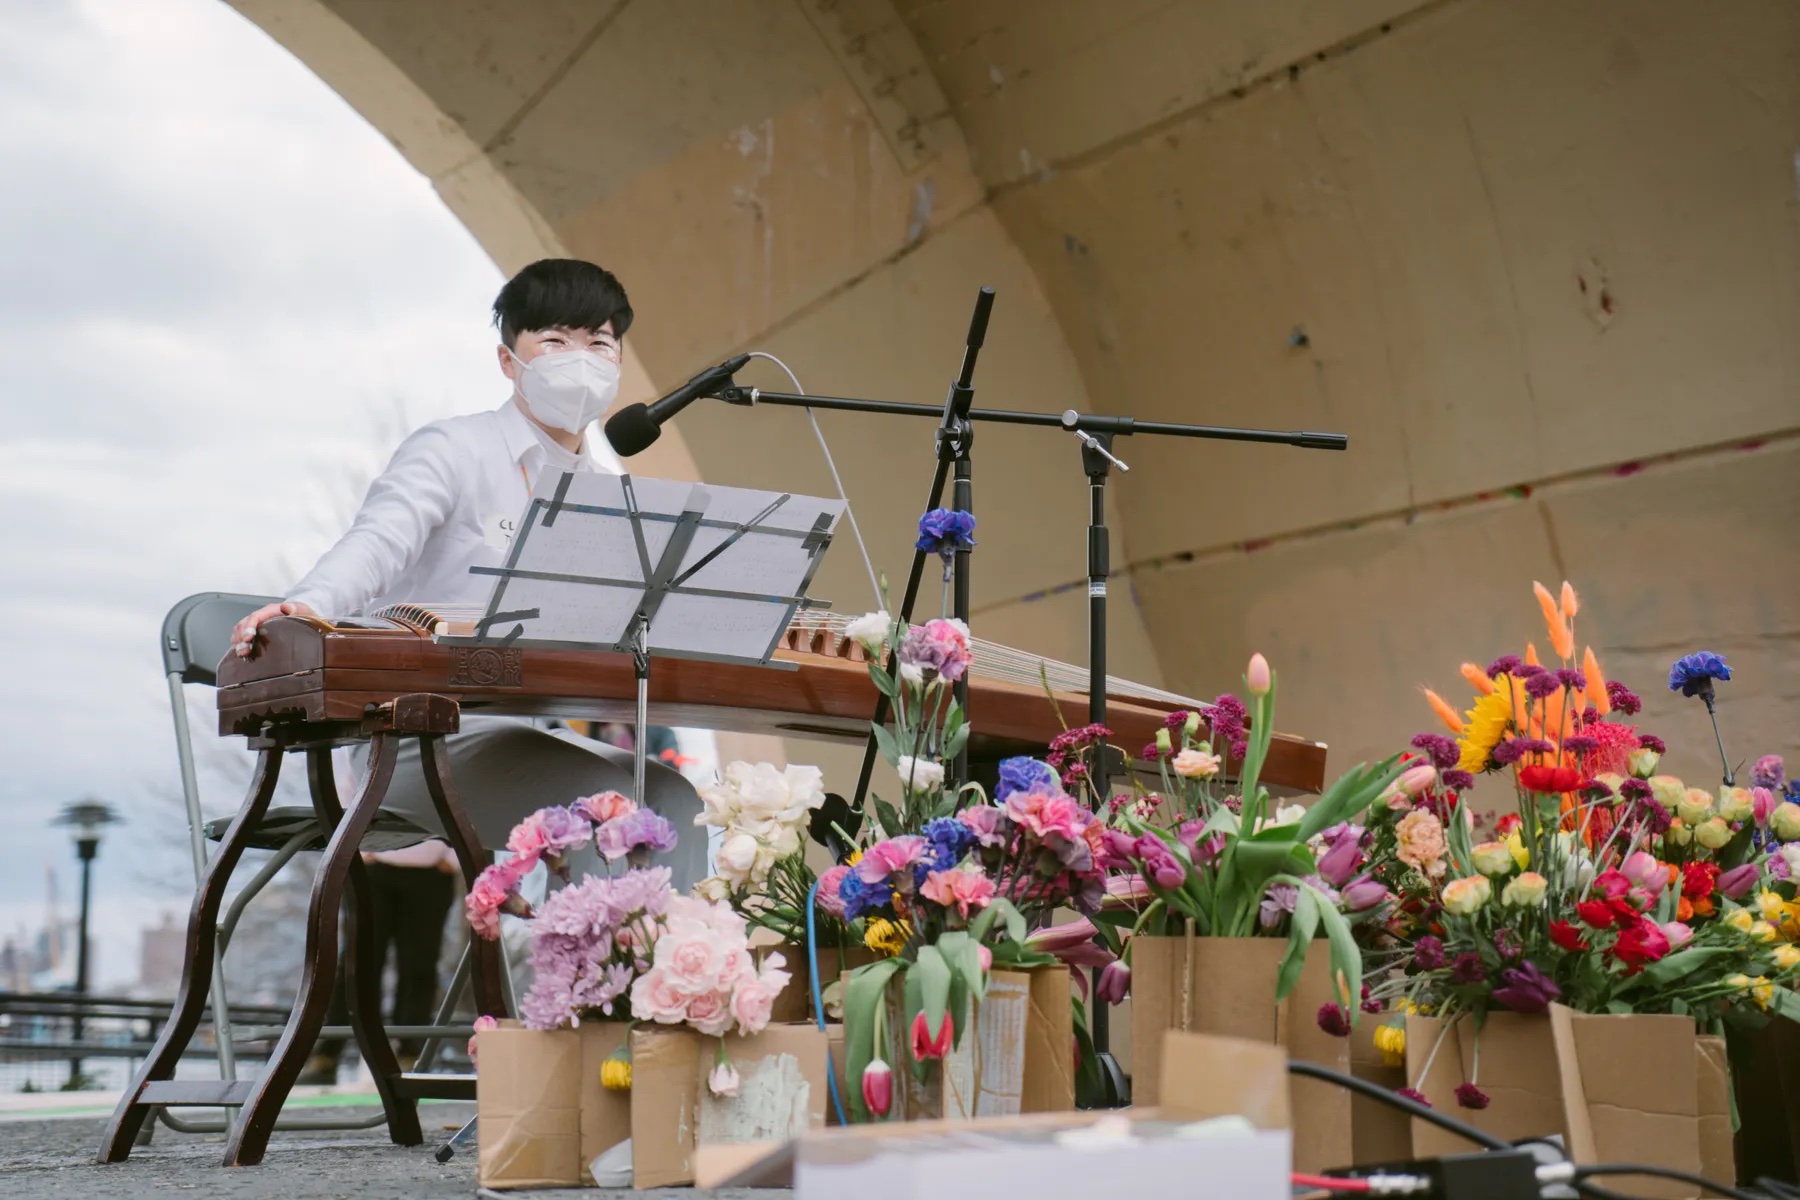 Clae on a stage at the East River Park sitting at their guzheng (Chinese zither) in a white outfit and a mask on speaking into a microphone in front of an audience. There are flowers in front of them on the stage.